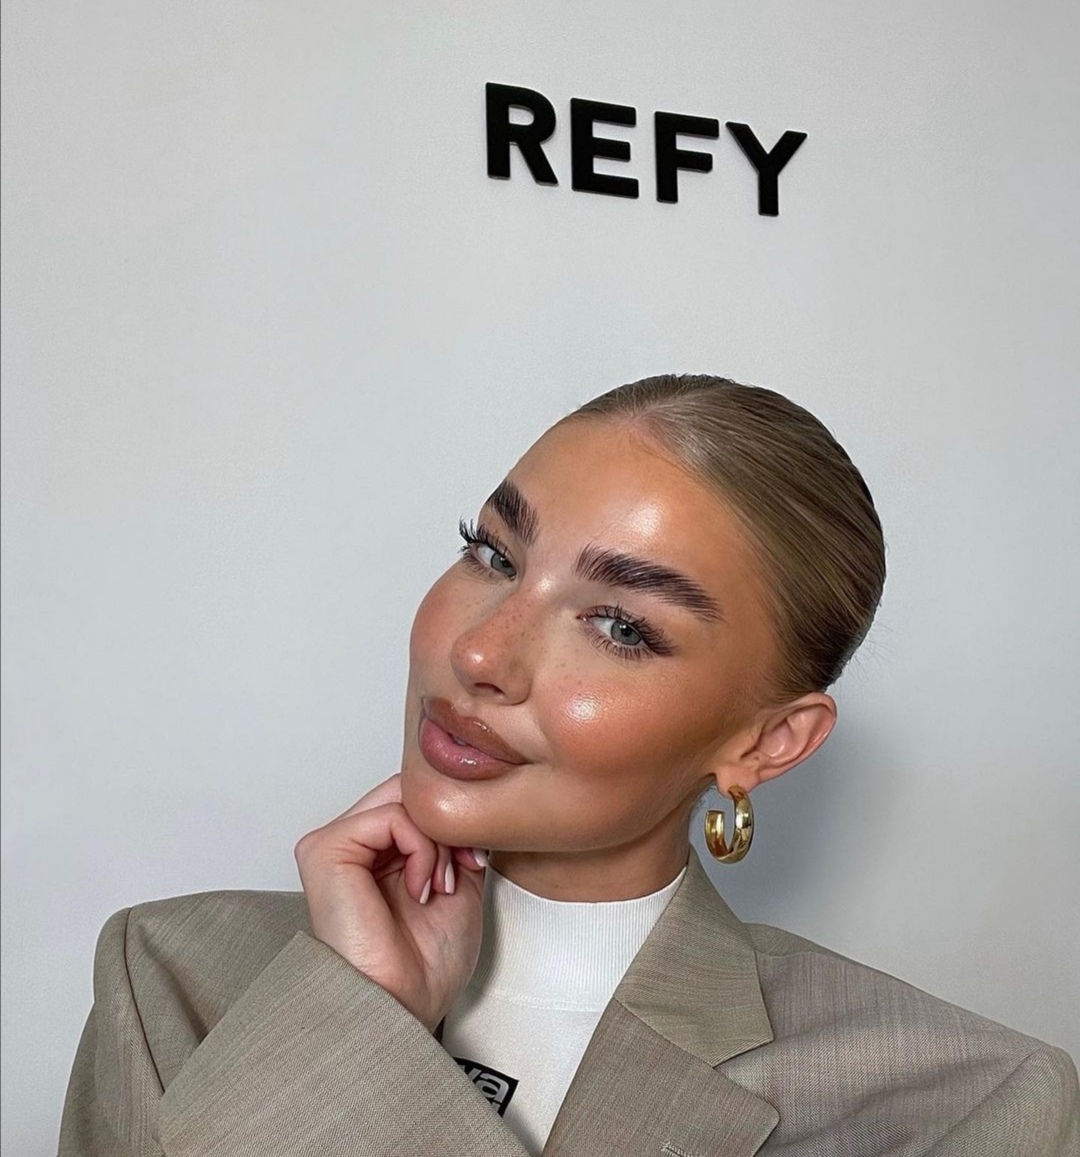 Refy Beauty - is it worth the hype?